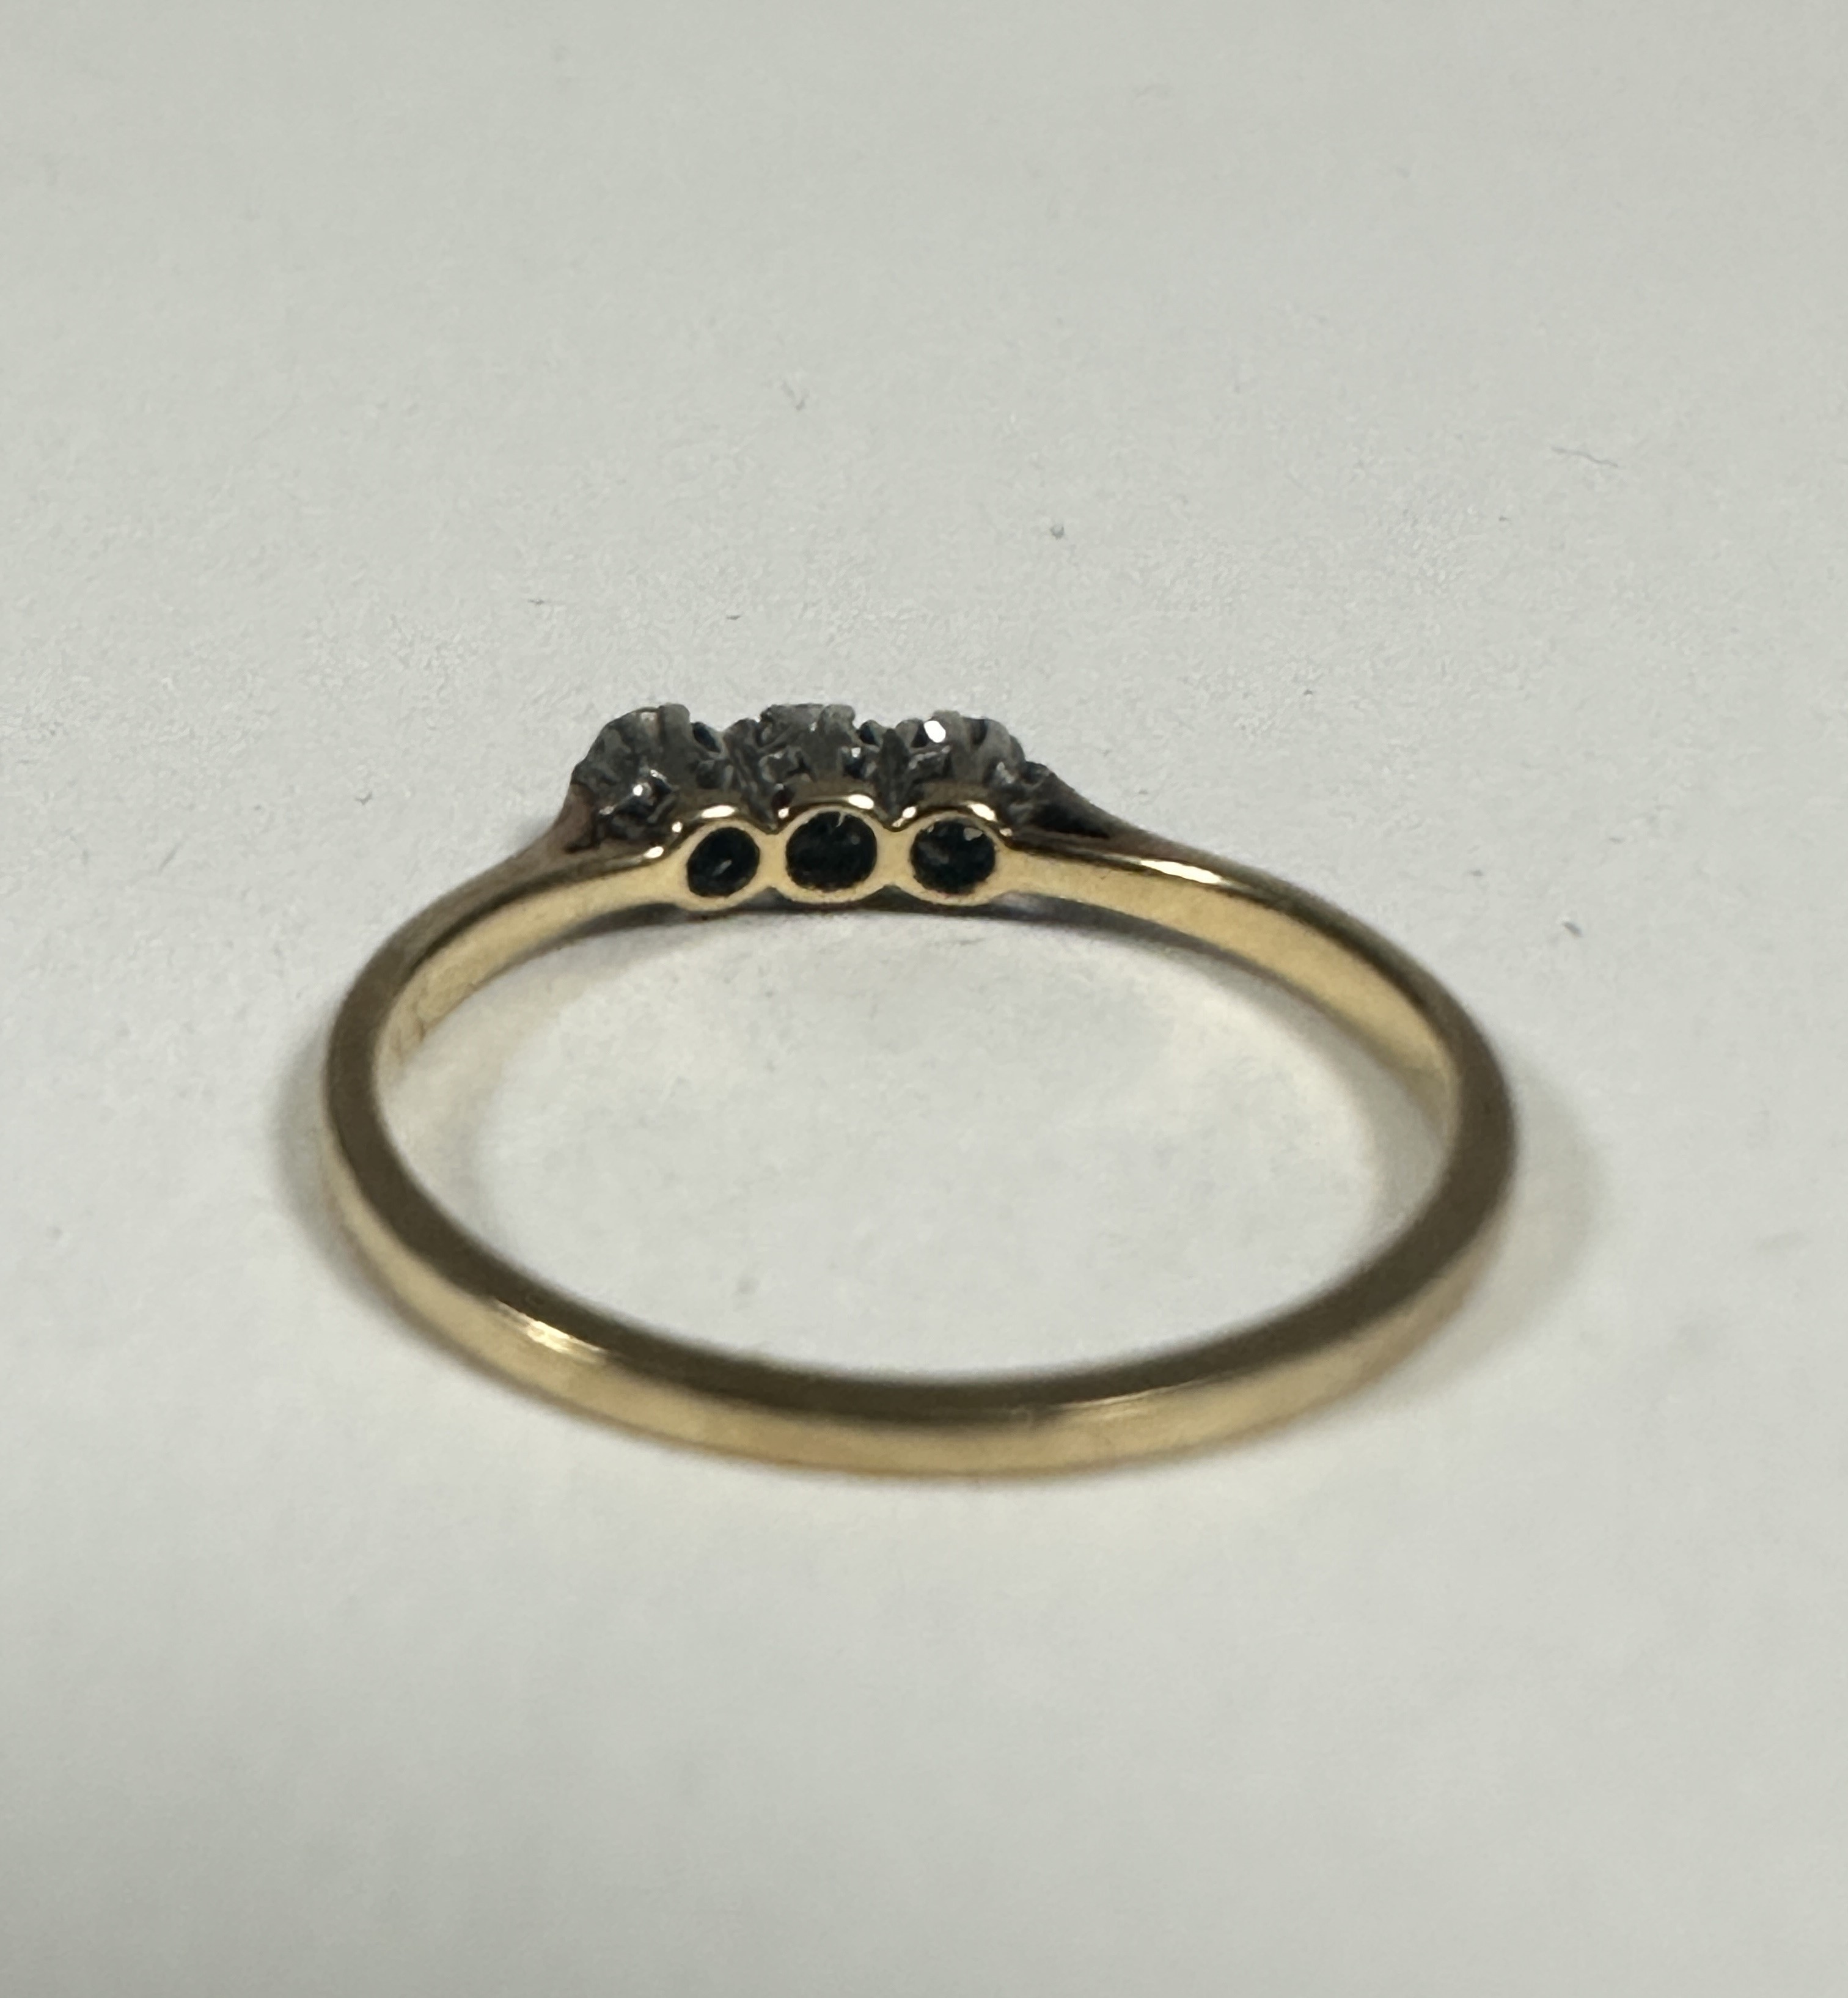 A 9ct gold three stone diamond ring set in platinum claw setting, K. 1.06g - Image 3 of 3